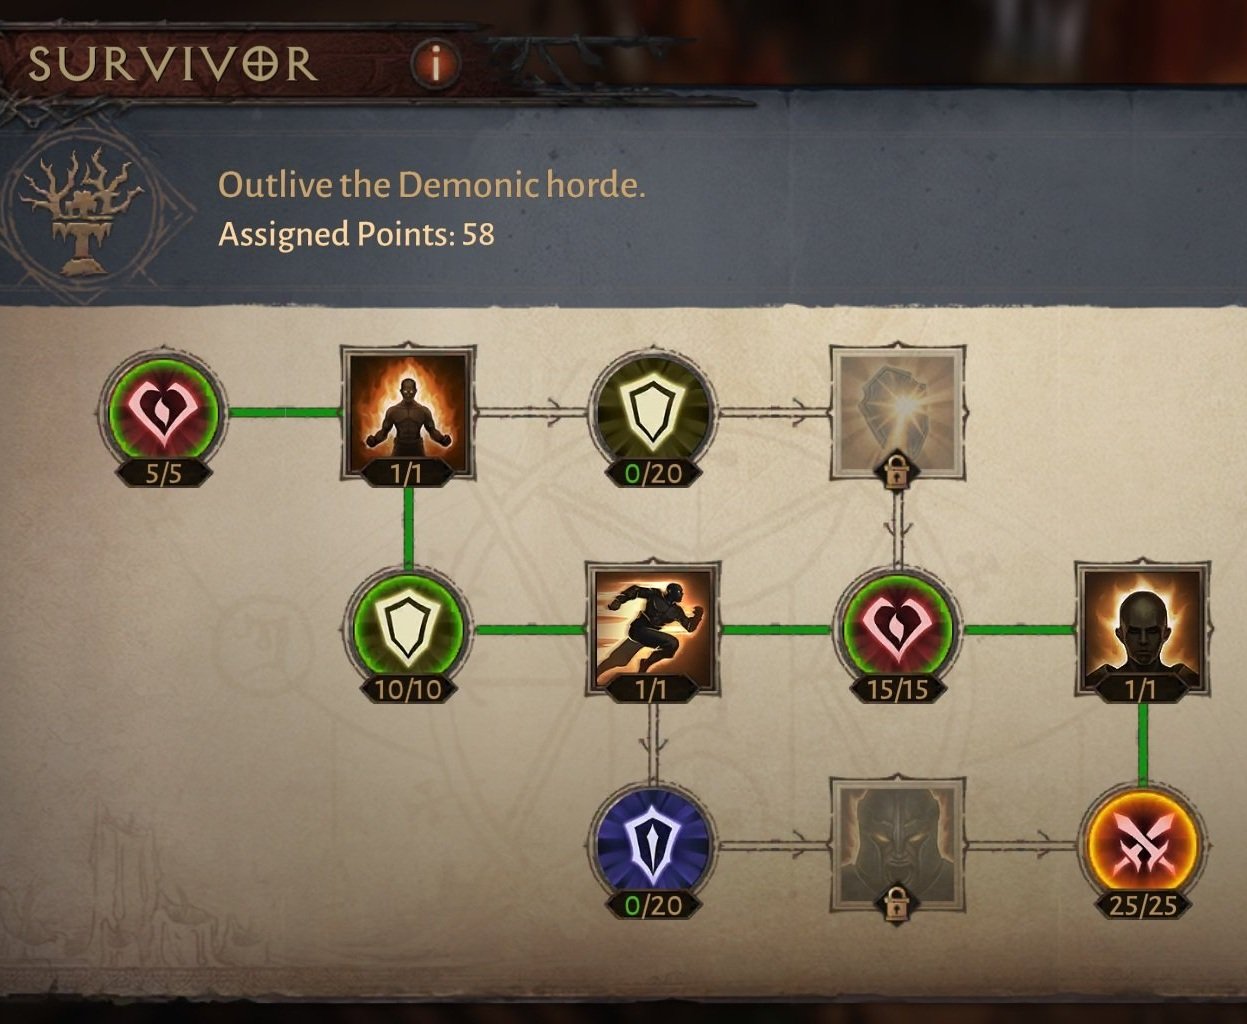 Guide] Top player' setups by class in Diablo Immortal - Inven Global